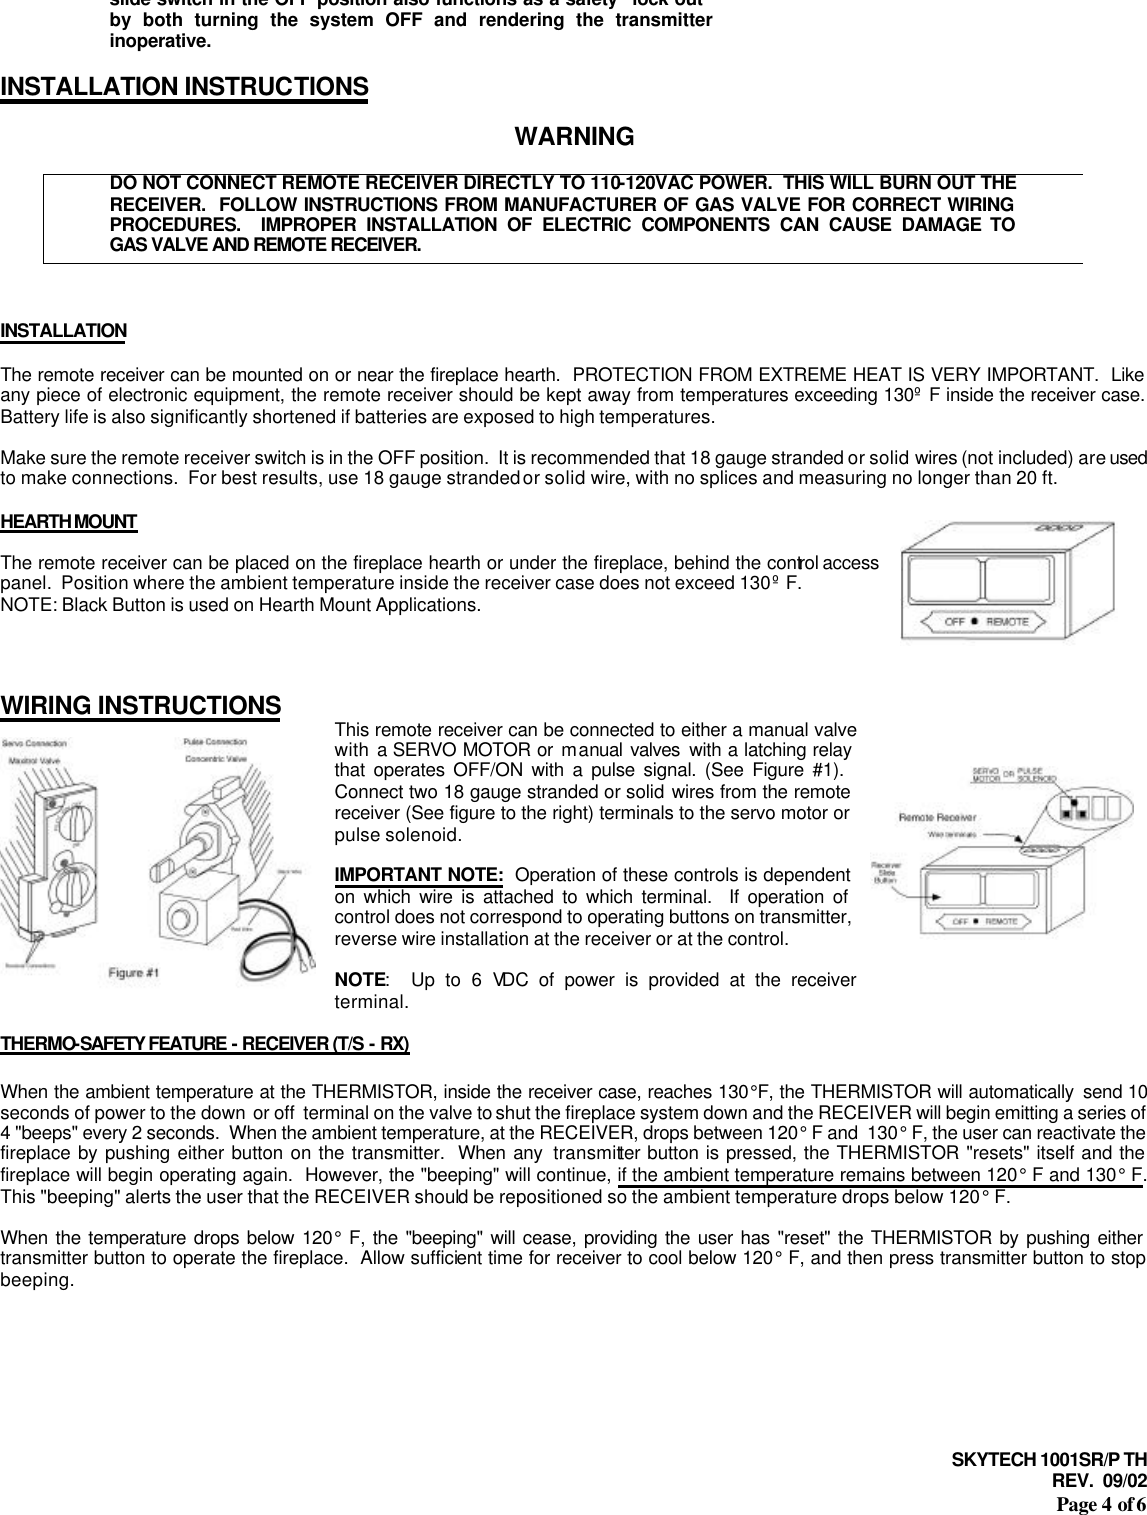 SKYTECH 1001SR/P TH REV.  09/02 Page 4 of 6 slide switch in the OFF position also functions as a safety &quot;lock out&quot; by both turning the system OFF and rendering the transmitter inoperative.  INSTALLATION INSTRUCTIONS  WARNING  DO NOT CONNECT REMOTE RECEIVER DIRECTLY TO 110-120VAC POWER.  THIS WILL BURN OUT THE RECEIVER.  FOLLOW INSTRUCTIONS FROM MANUFACTURER OF GAS VALVE FOR CORRECT WIRING PROCEDURES.  IMPROPER INSTALLATION OF ELECTRIC COMPONENTS CAN CAUSE DAMAGE TO GAS VALVE AND REMOTE RECEIVER.    INSTALLATION  The remote receiver can be mounted on or near the fireplace hearth.  PROTECTION FROM EXTREME HEAT IS VERY IMPORTANT.  Like any piece of electronic equipment, the remote receiver should be kept away from temperatures exceeding 130º F inside the receiver case.  Battery life is also significantly shortened if batteries are exposed to high temperatures.  Make sure the remote receiver switch is in the OFF position.  It is recommended that 18 gauge stranded or solid wires (not included) are used to make connections.  For best results, use 18 gauge stranded or solid wire, with no splices and measuring no longer than 20 ft.  HEARTH MOUNT  The remote receiver can be placed on the fireplace hearth or under the fireplace, behind the control access panel.  Position where the ambient temperature inside the receiver case does not exceed 130º F. NOTE: Black Button is used on Hearth Mount Applications.    WIRING INSTRUCTIONS This remote receiver can be connected to either a manual valve with a SERVO MOTOR or manual valves  with a latching relay that operates OFF/ON with a pulse signal. (See Figure #1).  Connect two 18 gauge stranded or solid wires from the remote receiver (See figure to the right) terminals to the servo motor or pulse solenoid.  IMPORTANT NOTE:  Operation of these controls is dependent on which wire is attached to which terminal.  If operation of control does not correspond to operating buttons on transmitter, reverse wire installation at the receiver or at the control.  NOTE:  Up to 6 VDC of power is provided at the receiver terminal.  THERMO-SAFETY FEATURE - RECEIVER (T/S - RX)  When the ambient temperature at the THERMISTOR, inside the receiver case, reaches 130°F, the THERMISTOR will automatically  send 10 seconds of power to the down  or off  terminal on the valve to shut the fireplace system down and the RECEIVER will begin emitting a series of 4 &quot;beeps&quot; every 2 seconds.  When the ambient temperature, at the RECEIVER, drops between 120° F and  130° F, the user can reactivate the fireplace by pushing either button on the transmitter.  When any transmitter button is pressed, the THERMISTOR &quot;resets&quot; itself and the fireplace will begin operating again.  However, the &quot;beeping&quot; will continue, if the ambient temperature remains between 120° F and 130° F.  This &quot;beeping&quot; alerts the user that the RECEIVER should be repositioned so the ambient temperature drops below 120° F.  When the temperature drops below 120° F, the &quot;beeping&quot; will cease, providing the user has &quot;reset&quot; the THERMISTOR by pushing either transmitter button to operate the fireplace.  Allow sufficient time for receiver to cool below 120° F, and then press transmitter button to stop beeping.      